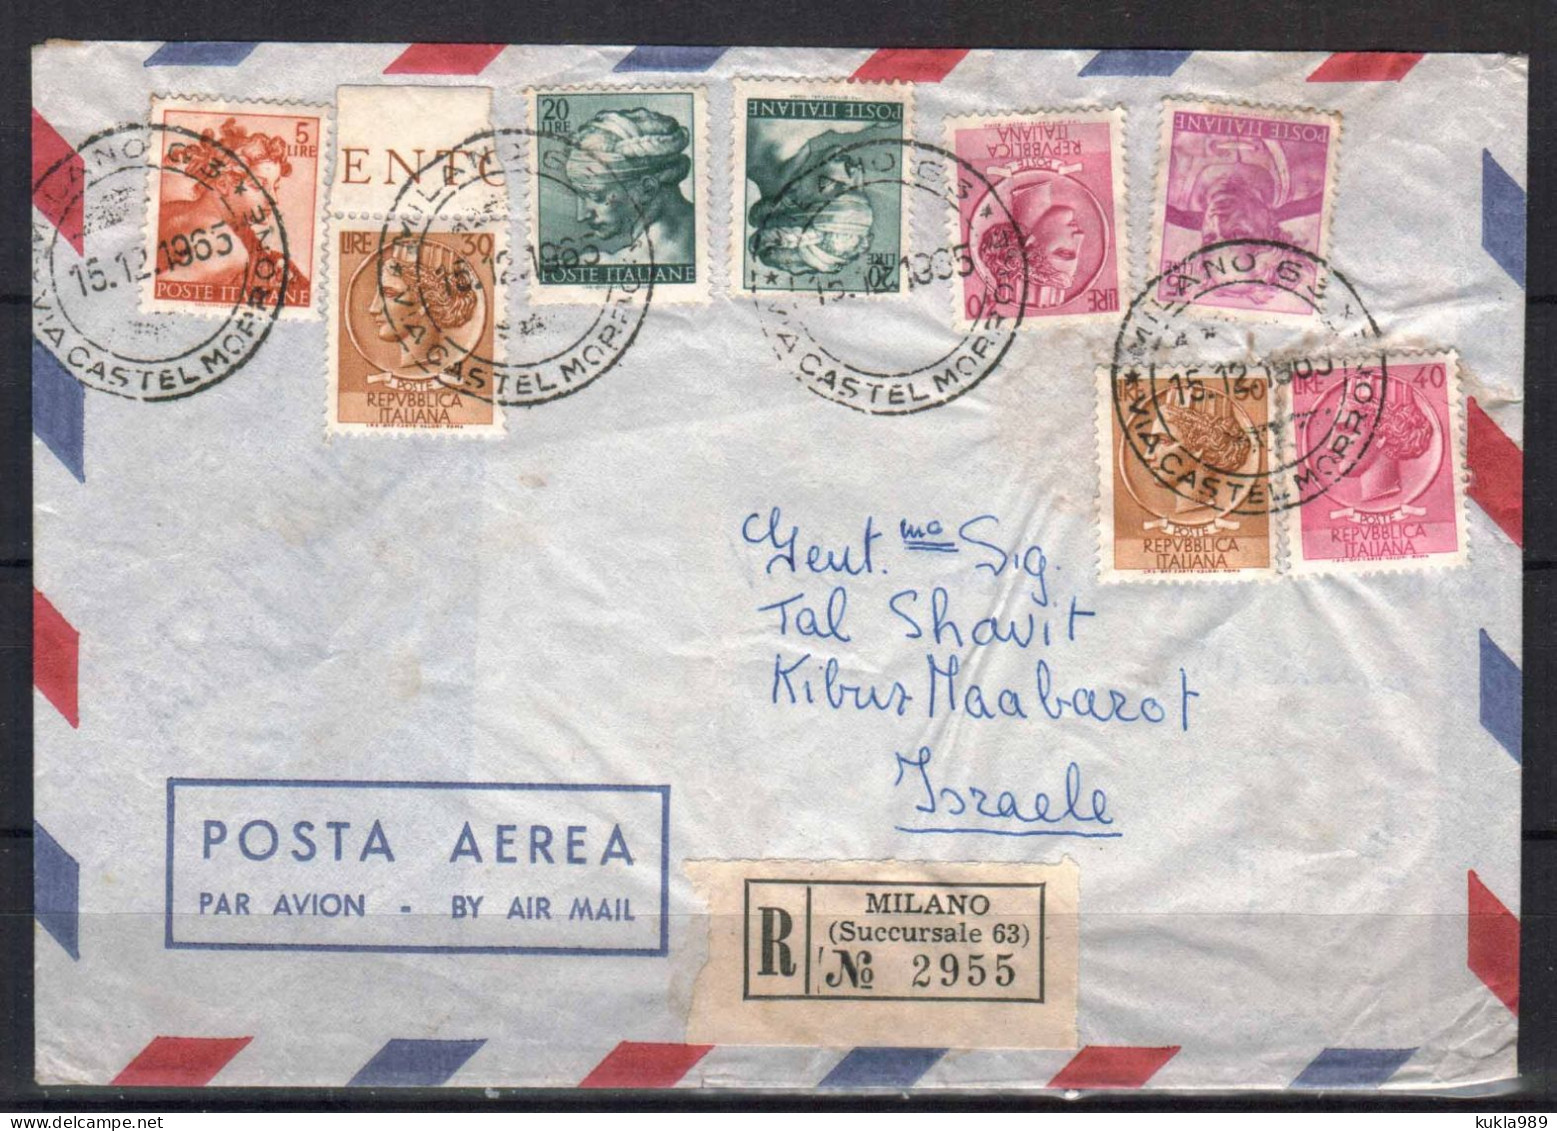 ITALY STAMPS. 1965 REG. COVER TO ISRAEL - Luchtpost